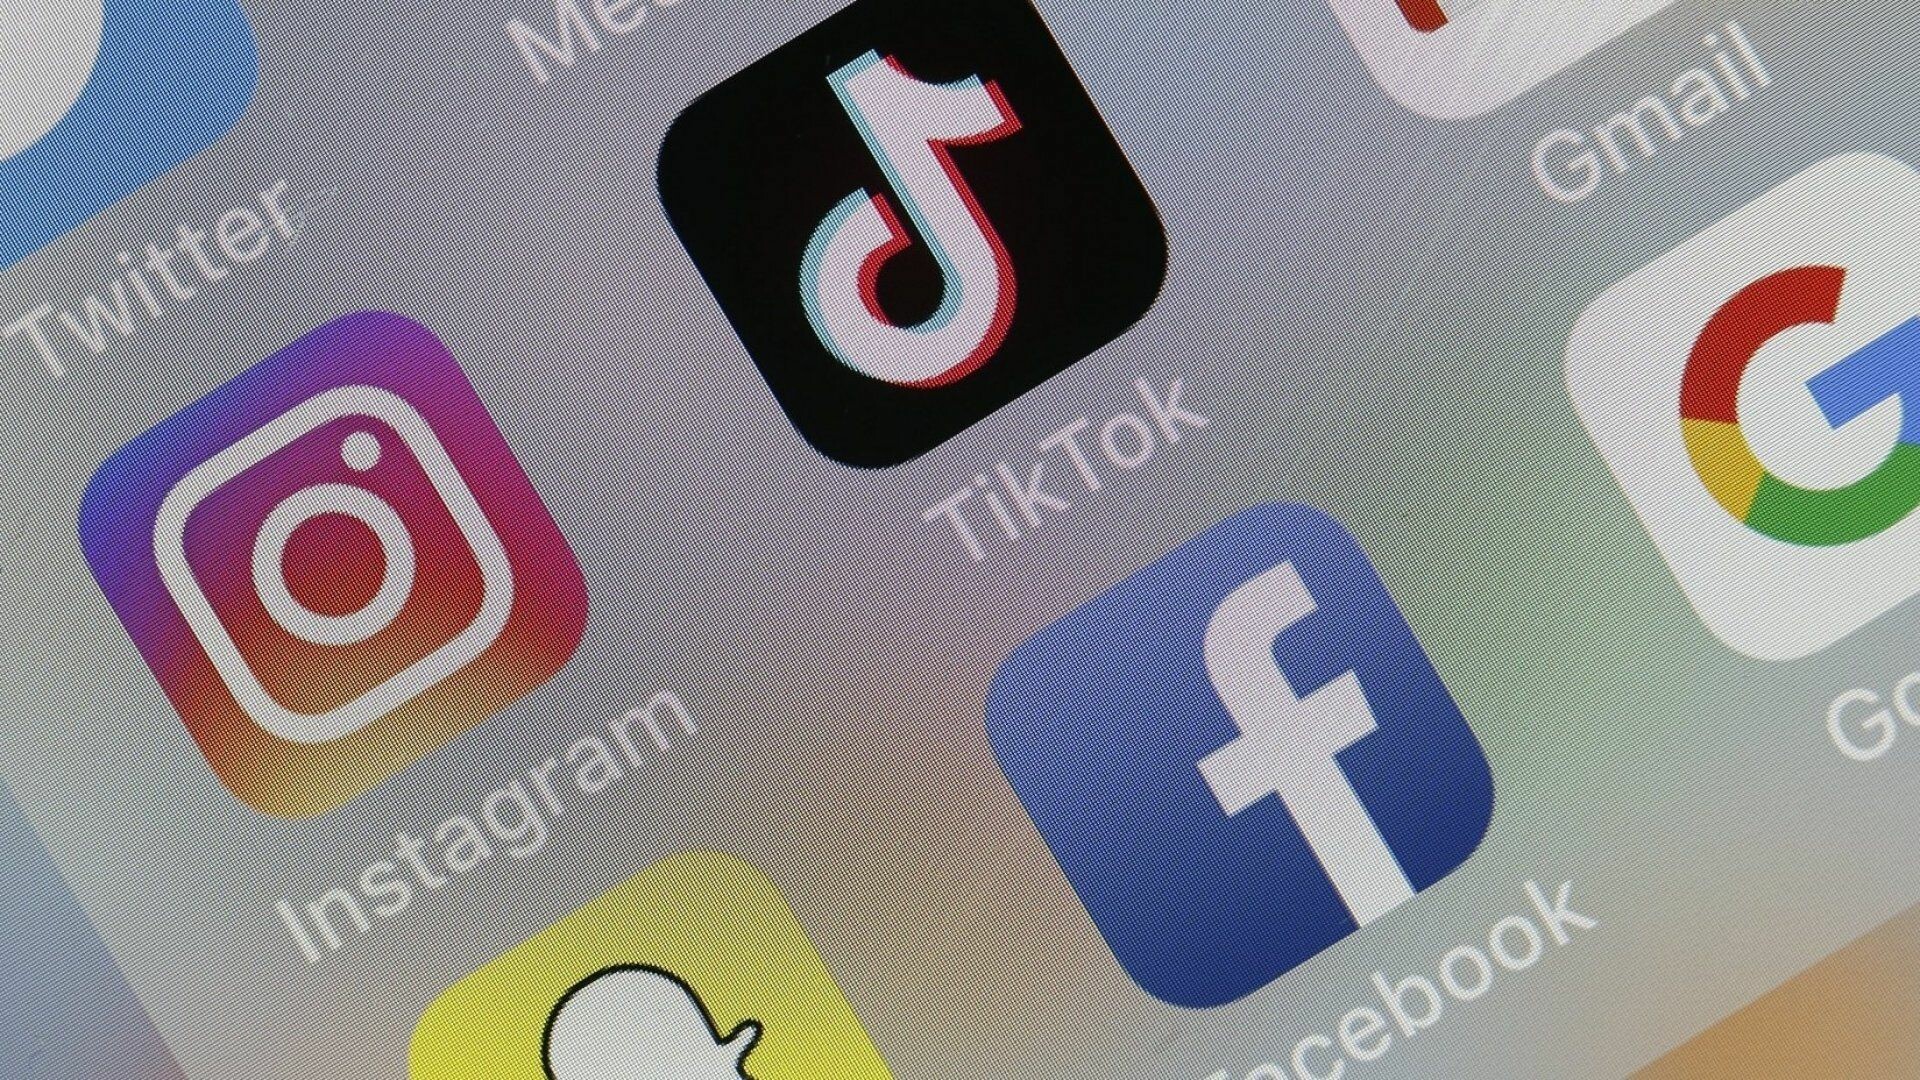 TikTok: A social media platform targeted at young mobile phone users, Apps. 1920x1080 Full HD Wallpaper.